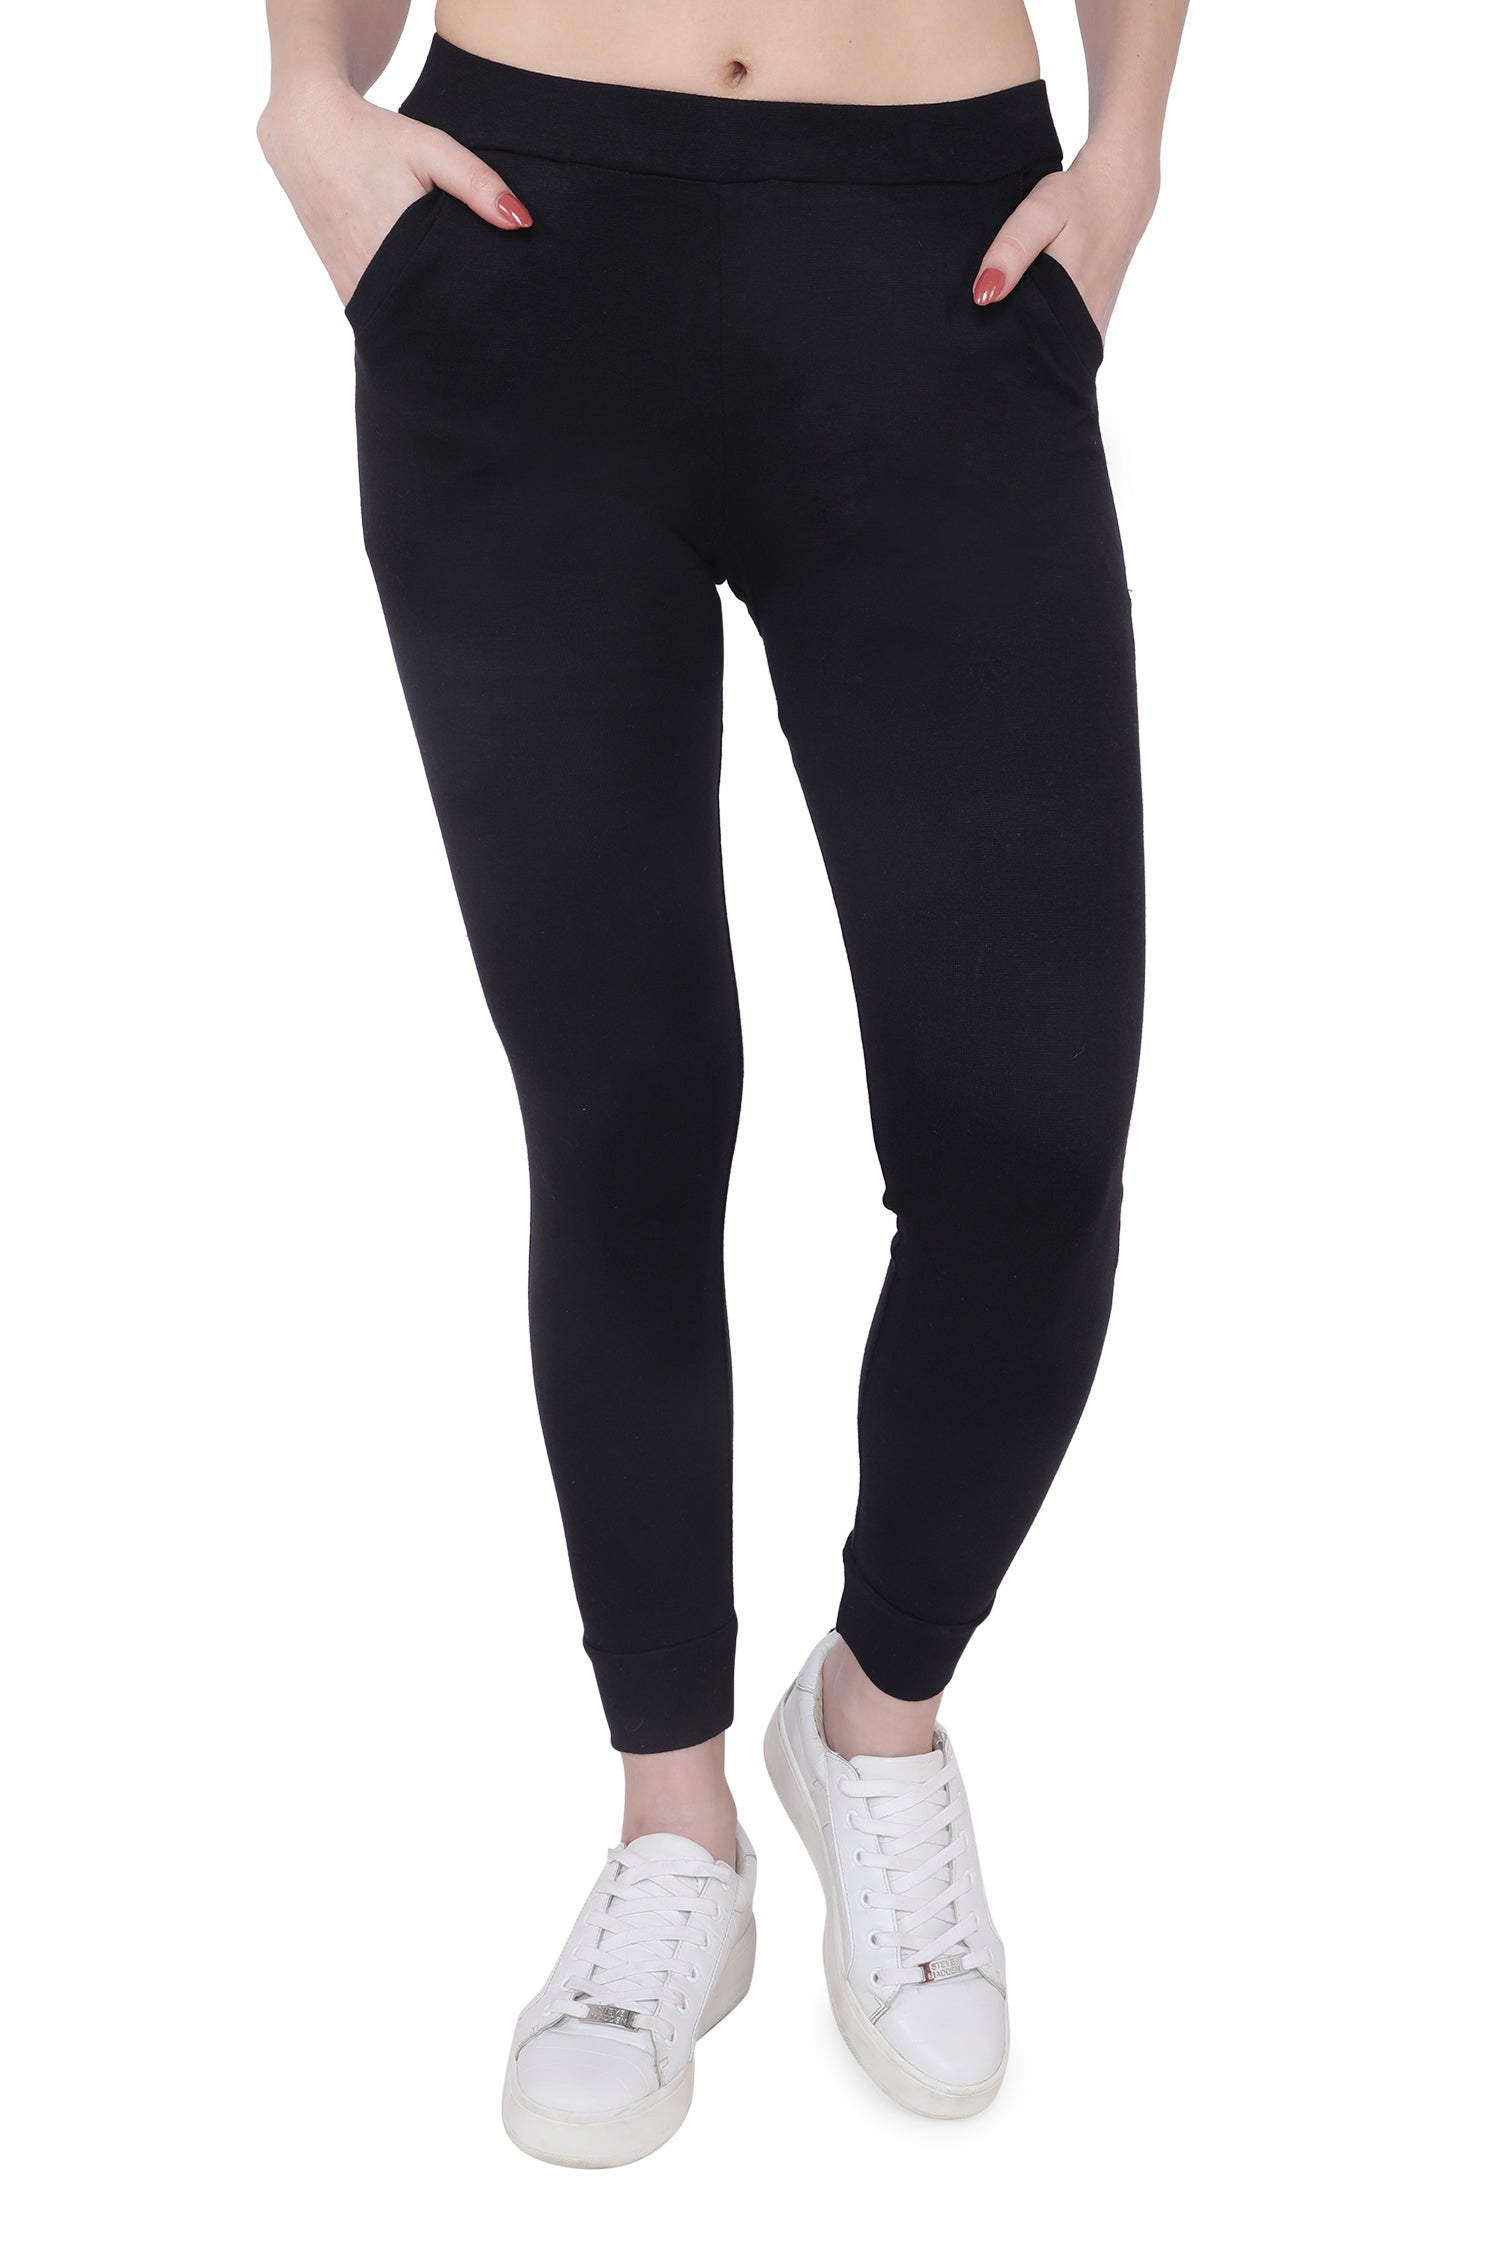 Buy KRAUS Solid Cotton blend Slim Fit Women's Casual Trousers | Shoppers  Stop